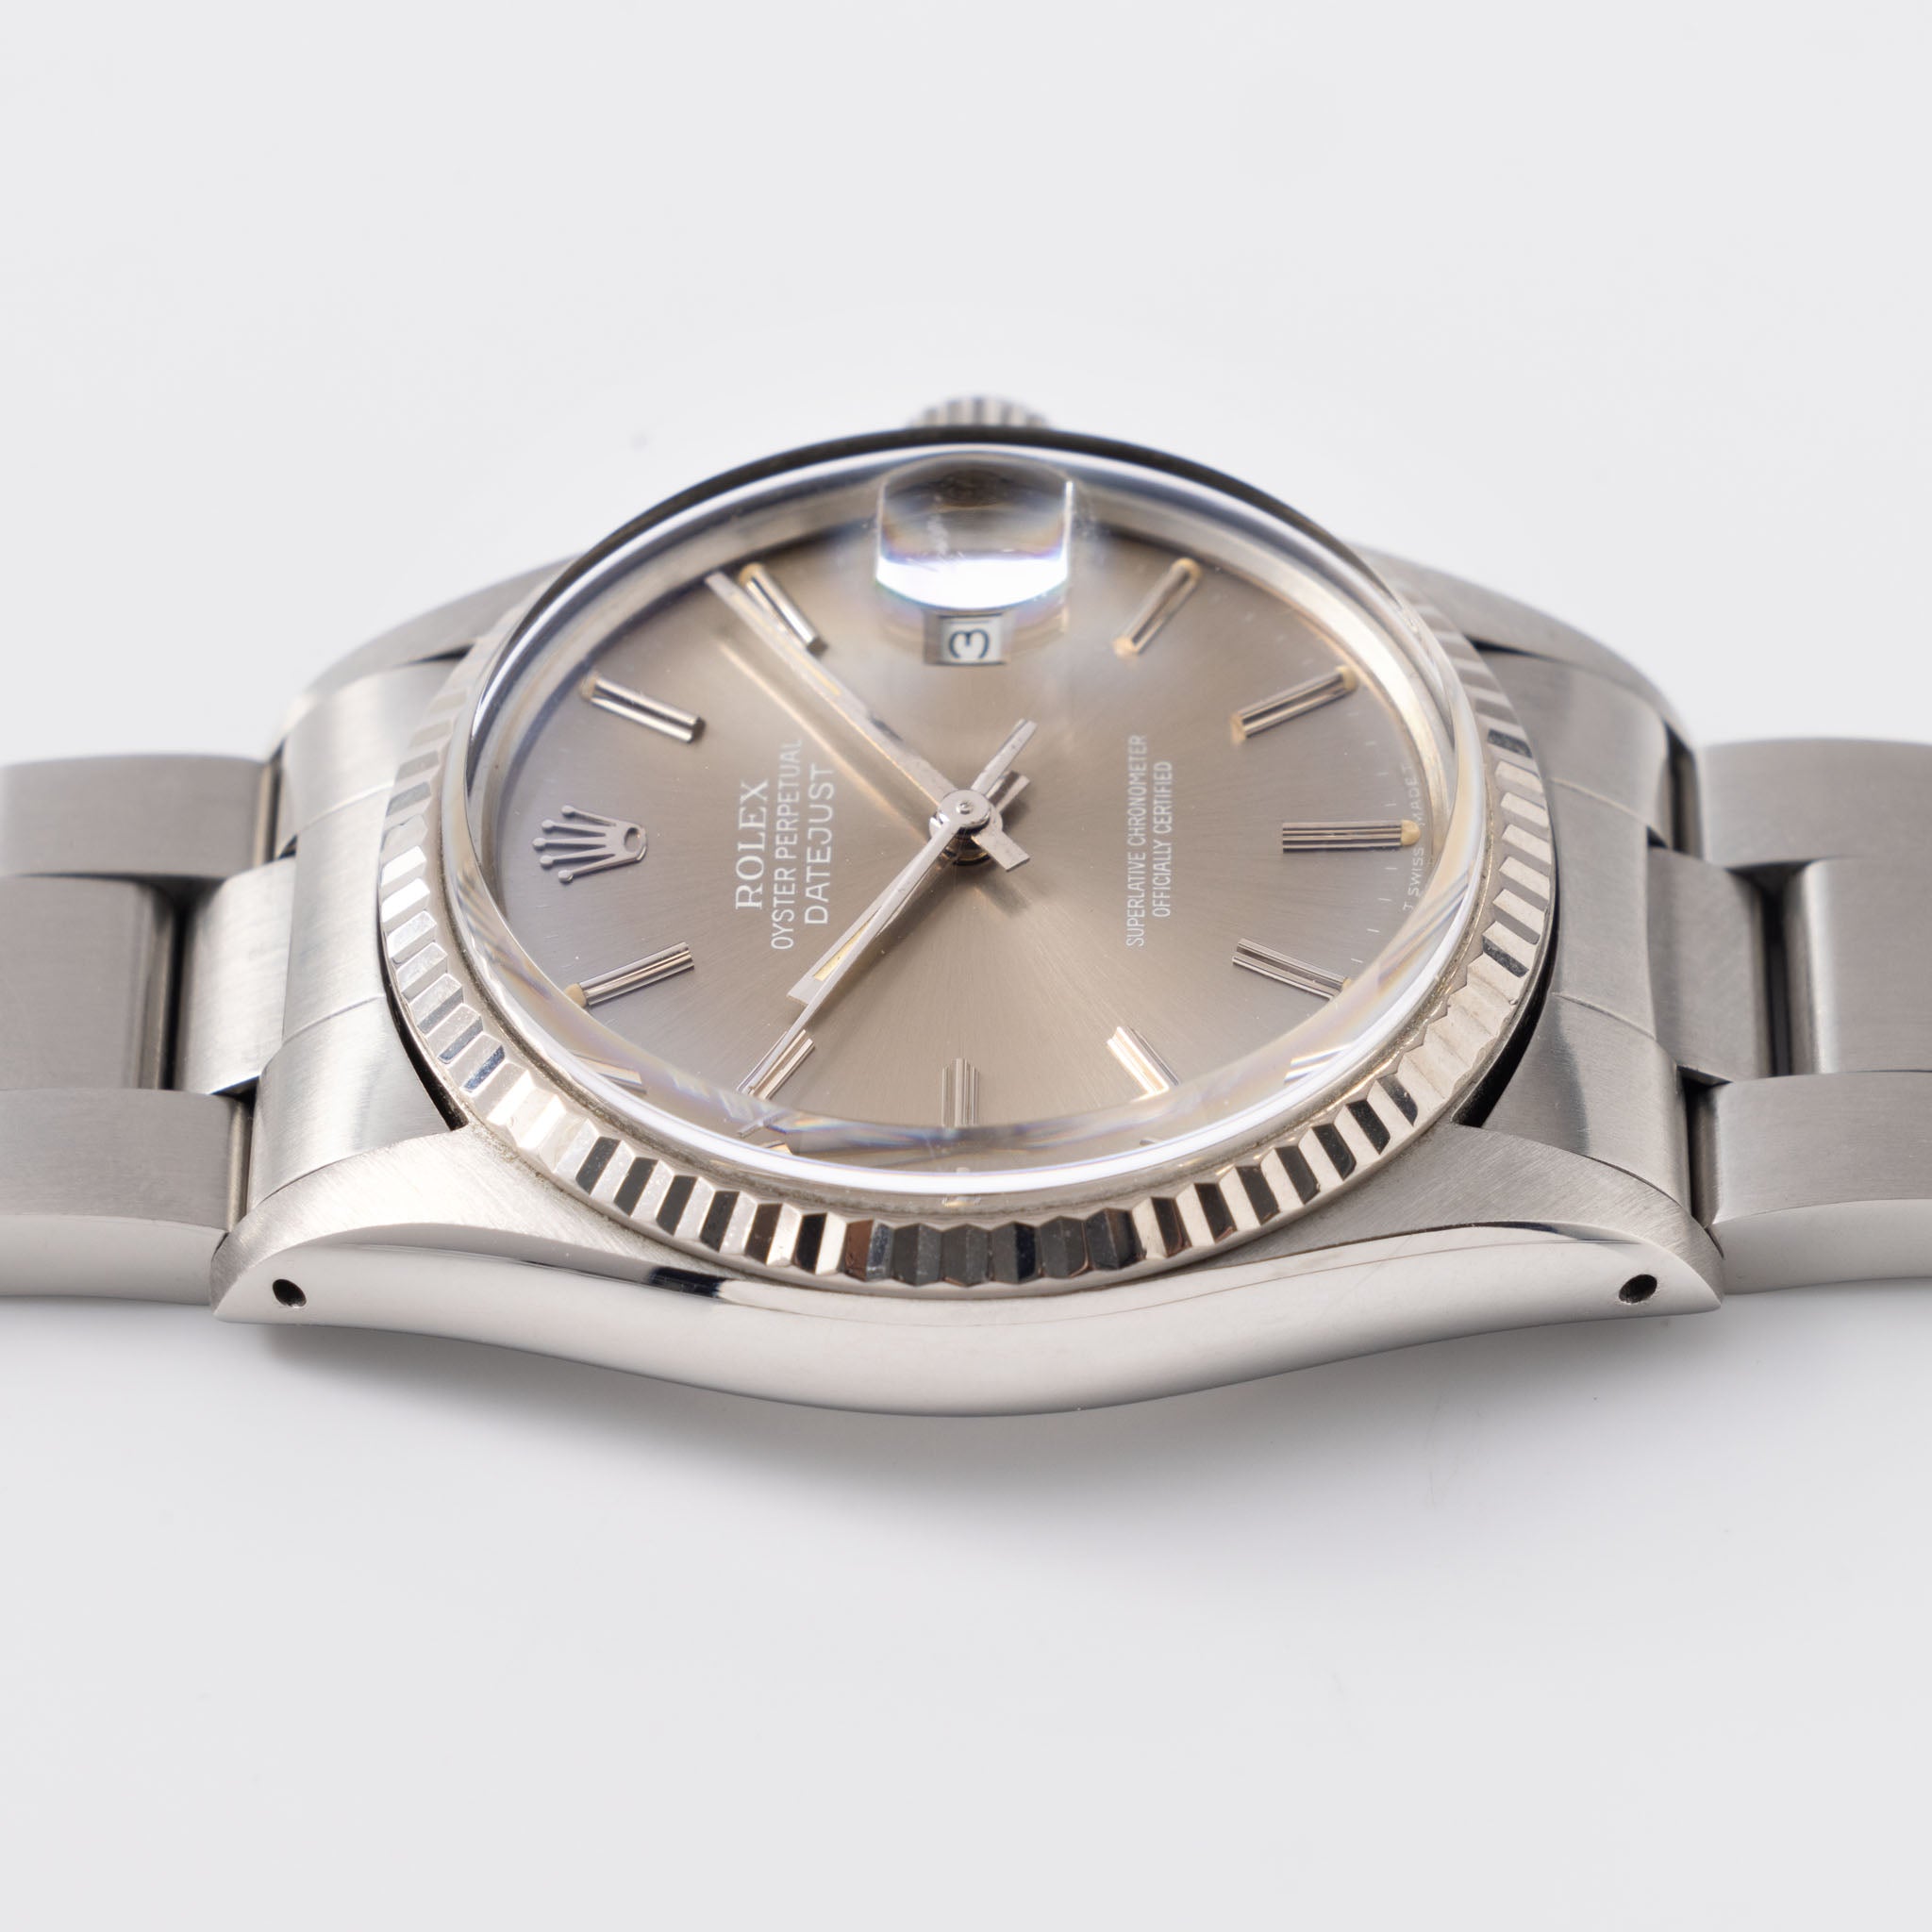 Rolex Datejust Taupe dial ref 16014